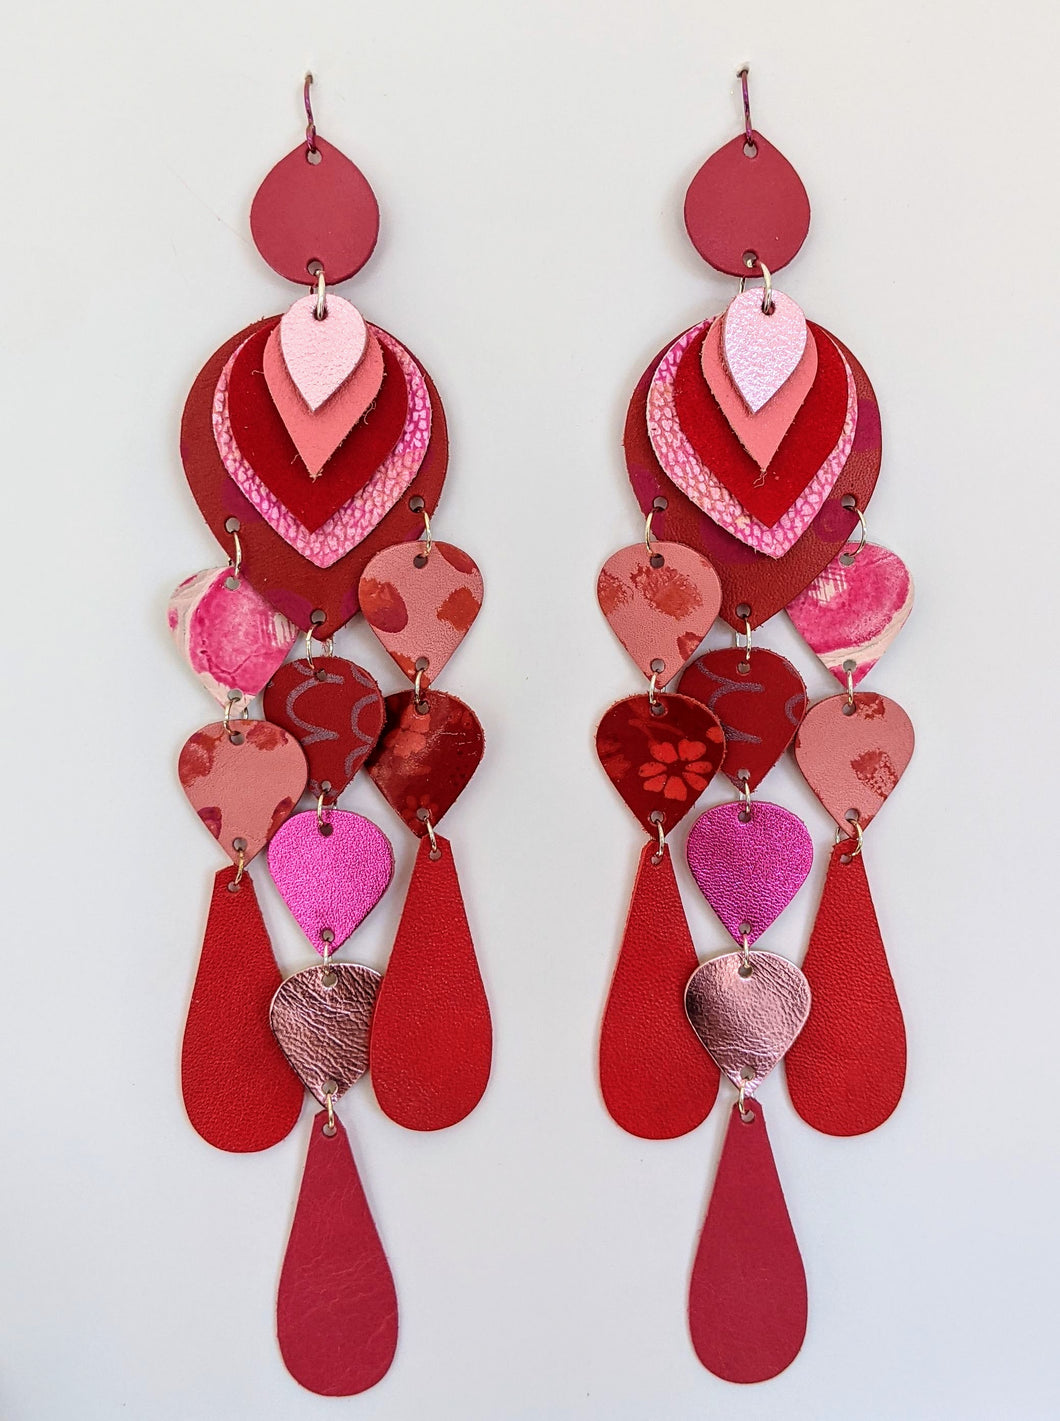 Red and pink statement earrings handmade from leather. Long dangles of small colourful pieces in strawberry pinks and reds.